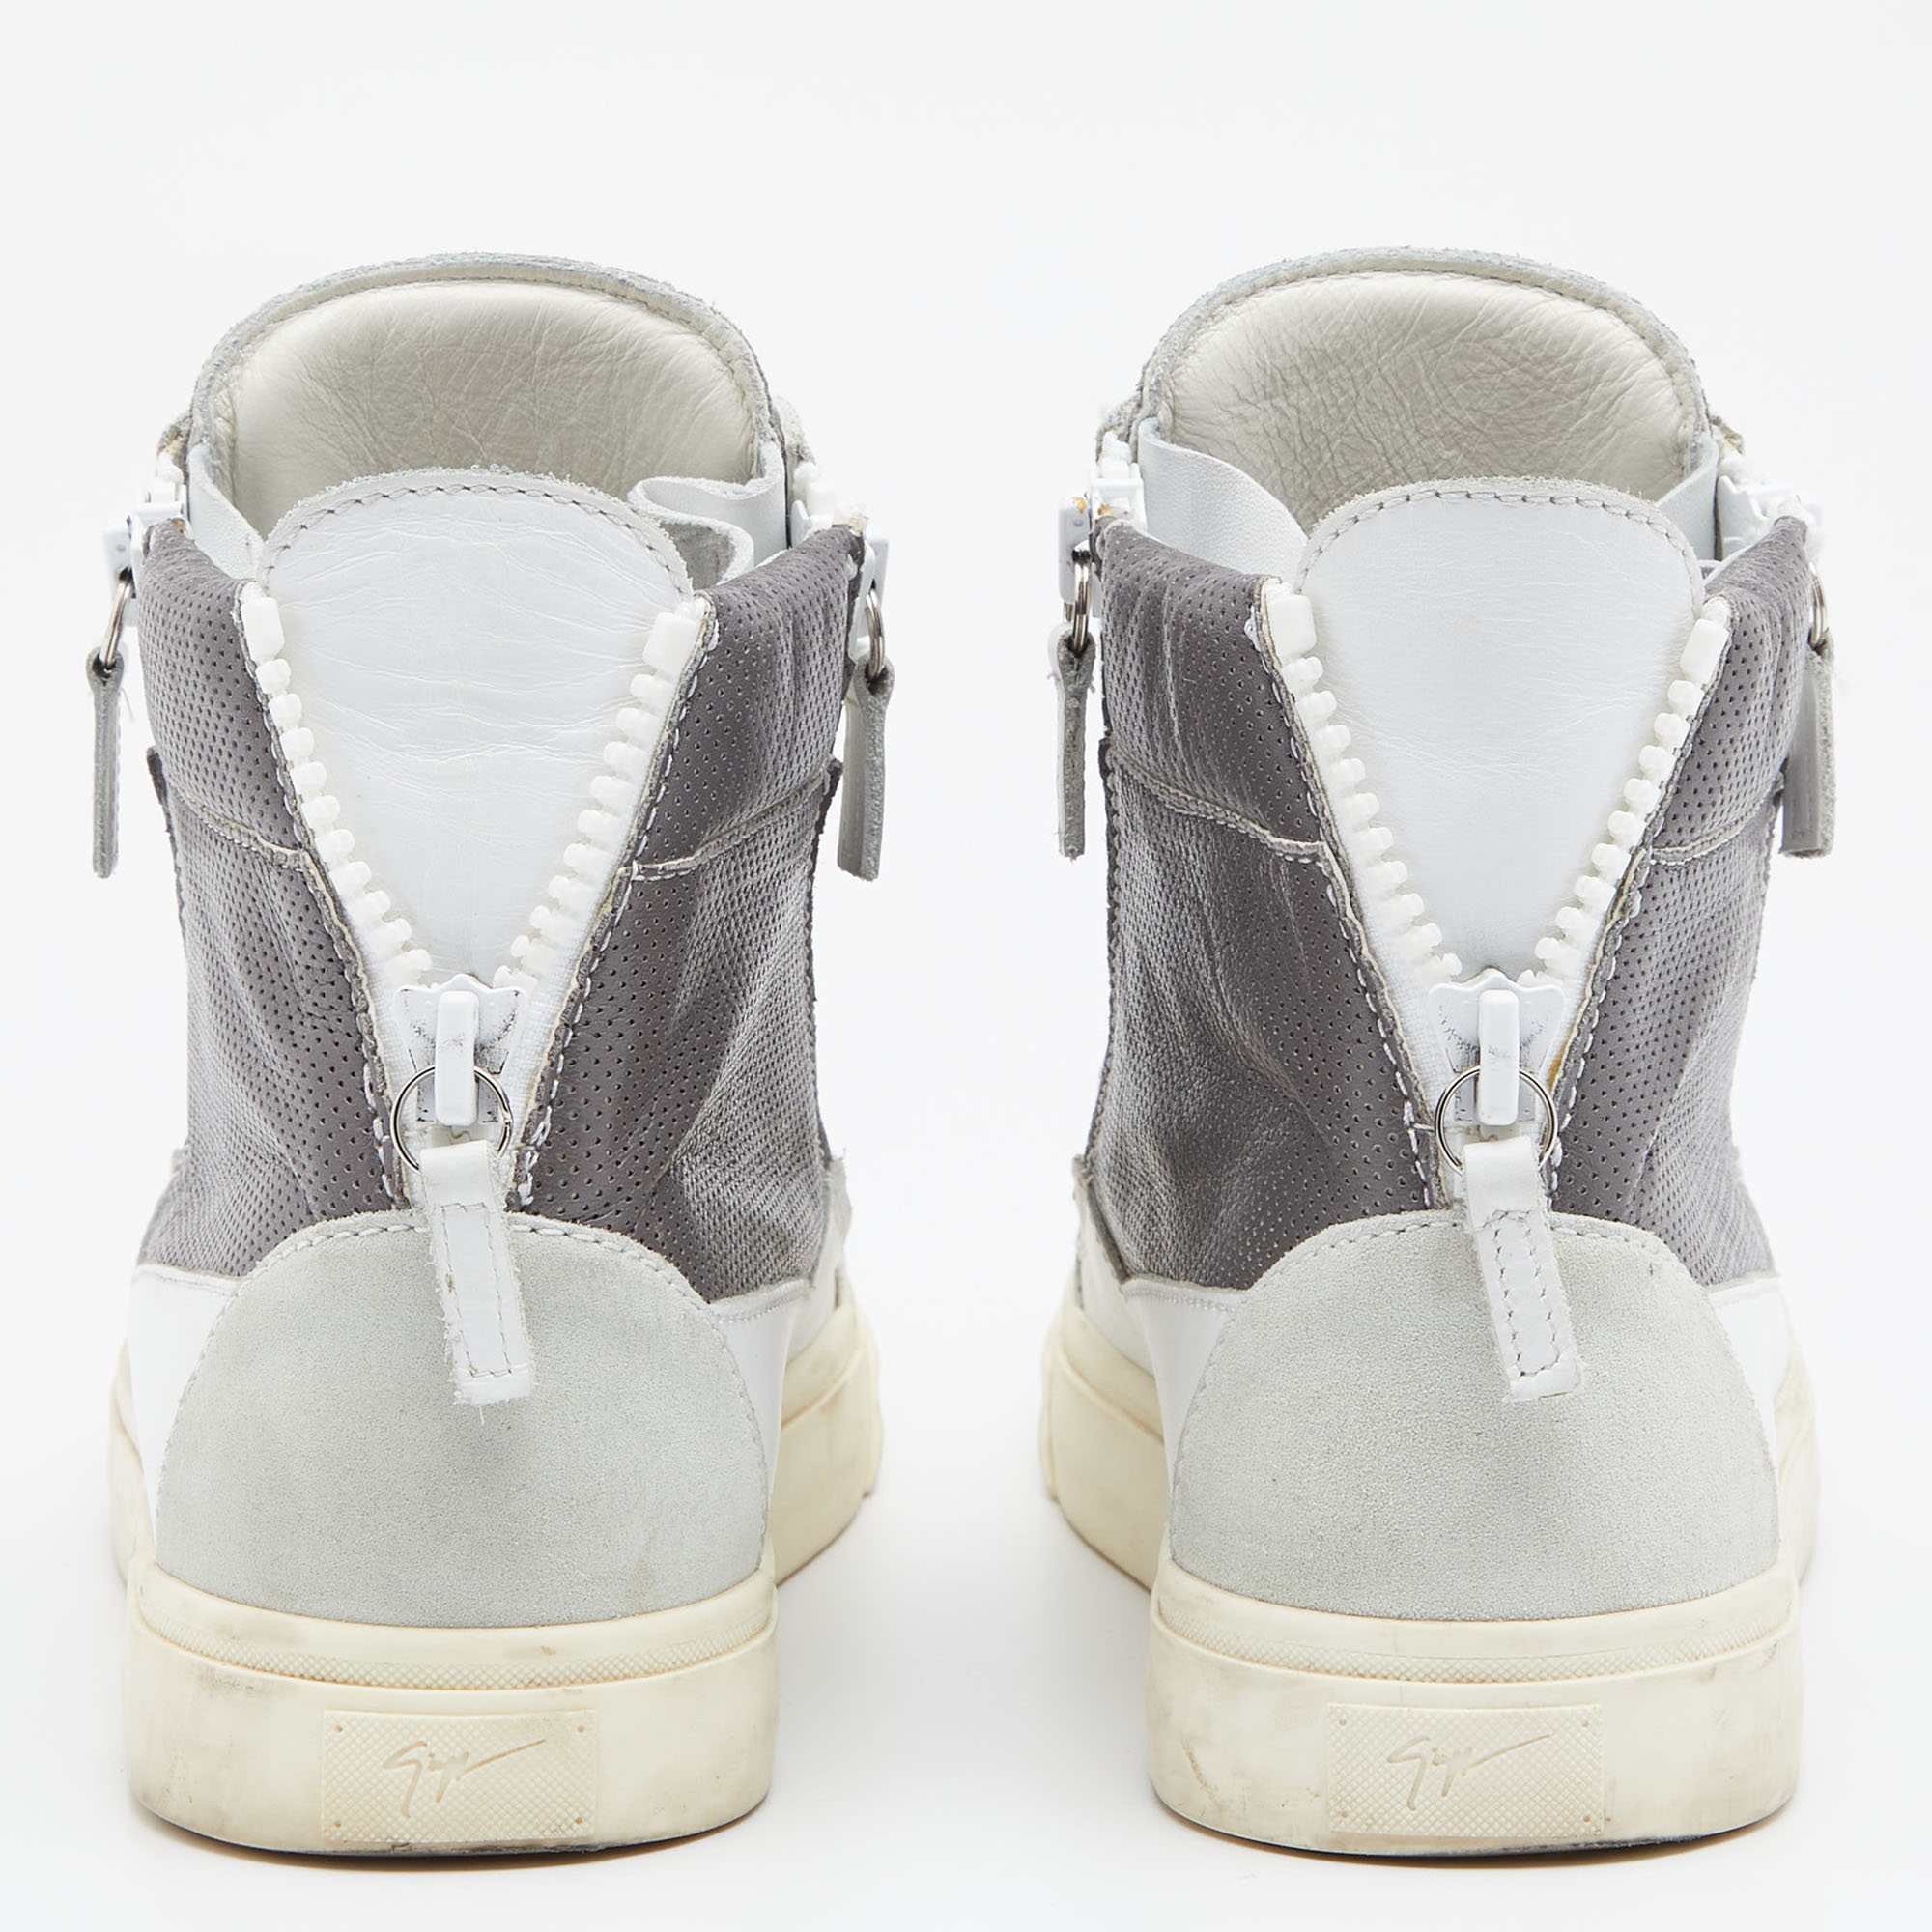 Giuseppe Zanotti Grey/White Perforated Leather And Suede Double Zip High Top Sneakers Size 40